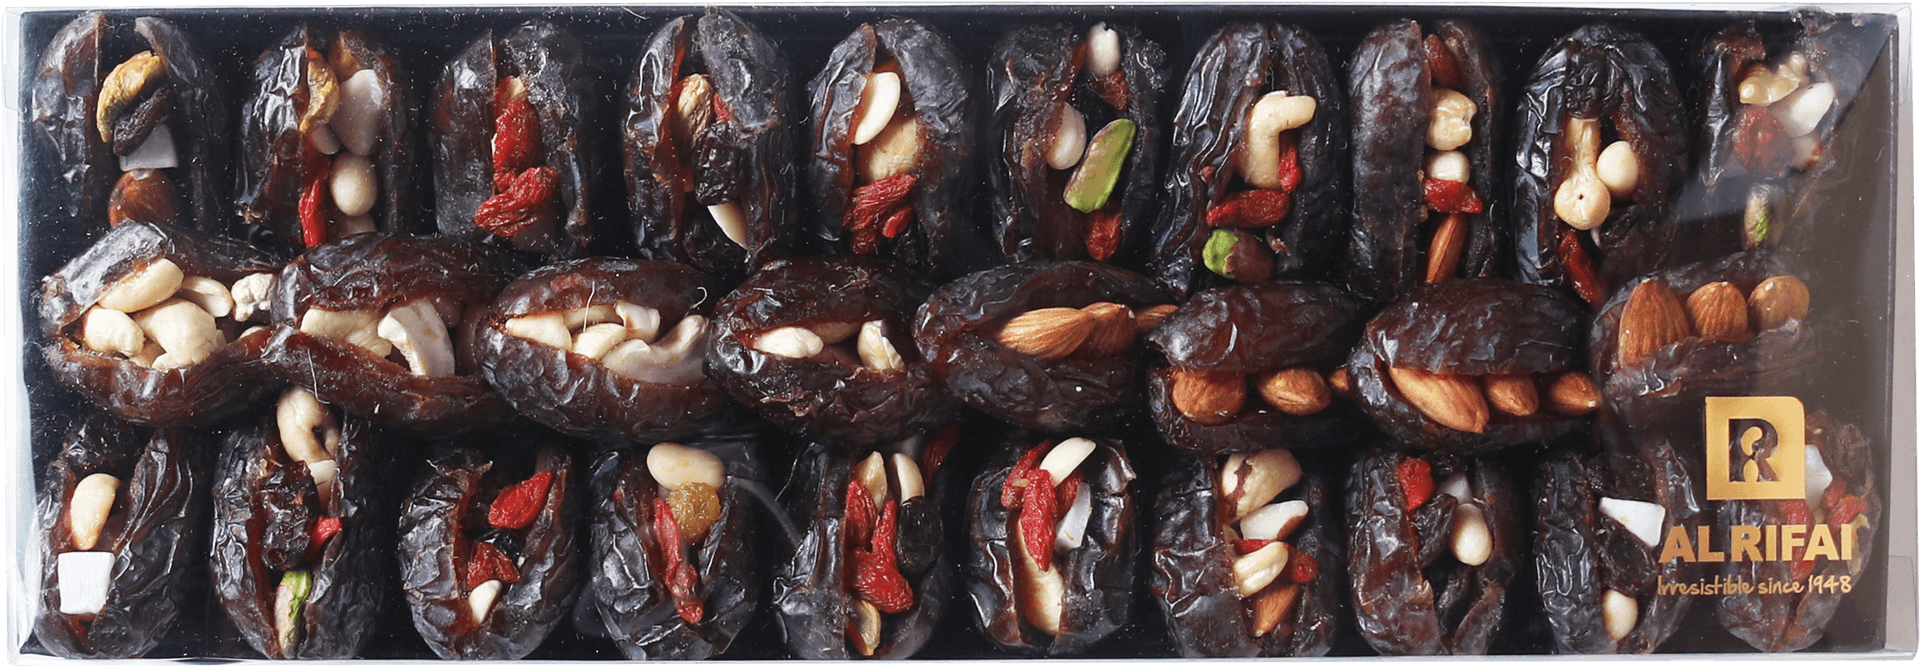 Stuffed Dates Assorted Nutsand Dried Fruit PNG